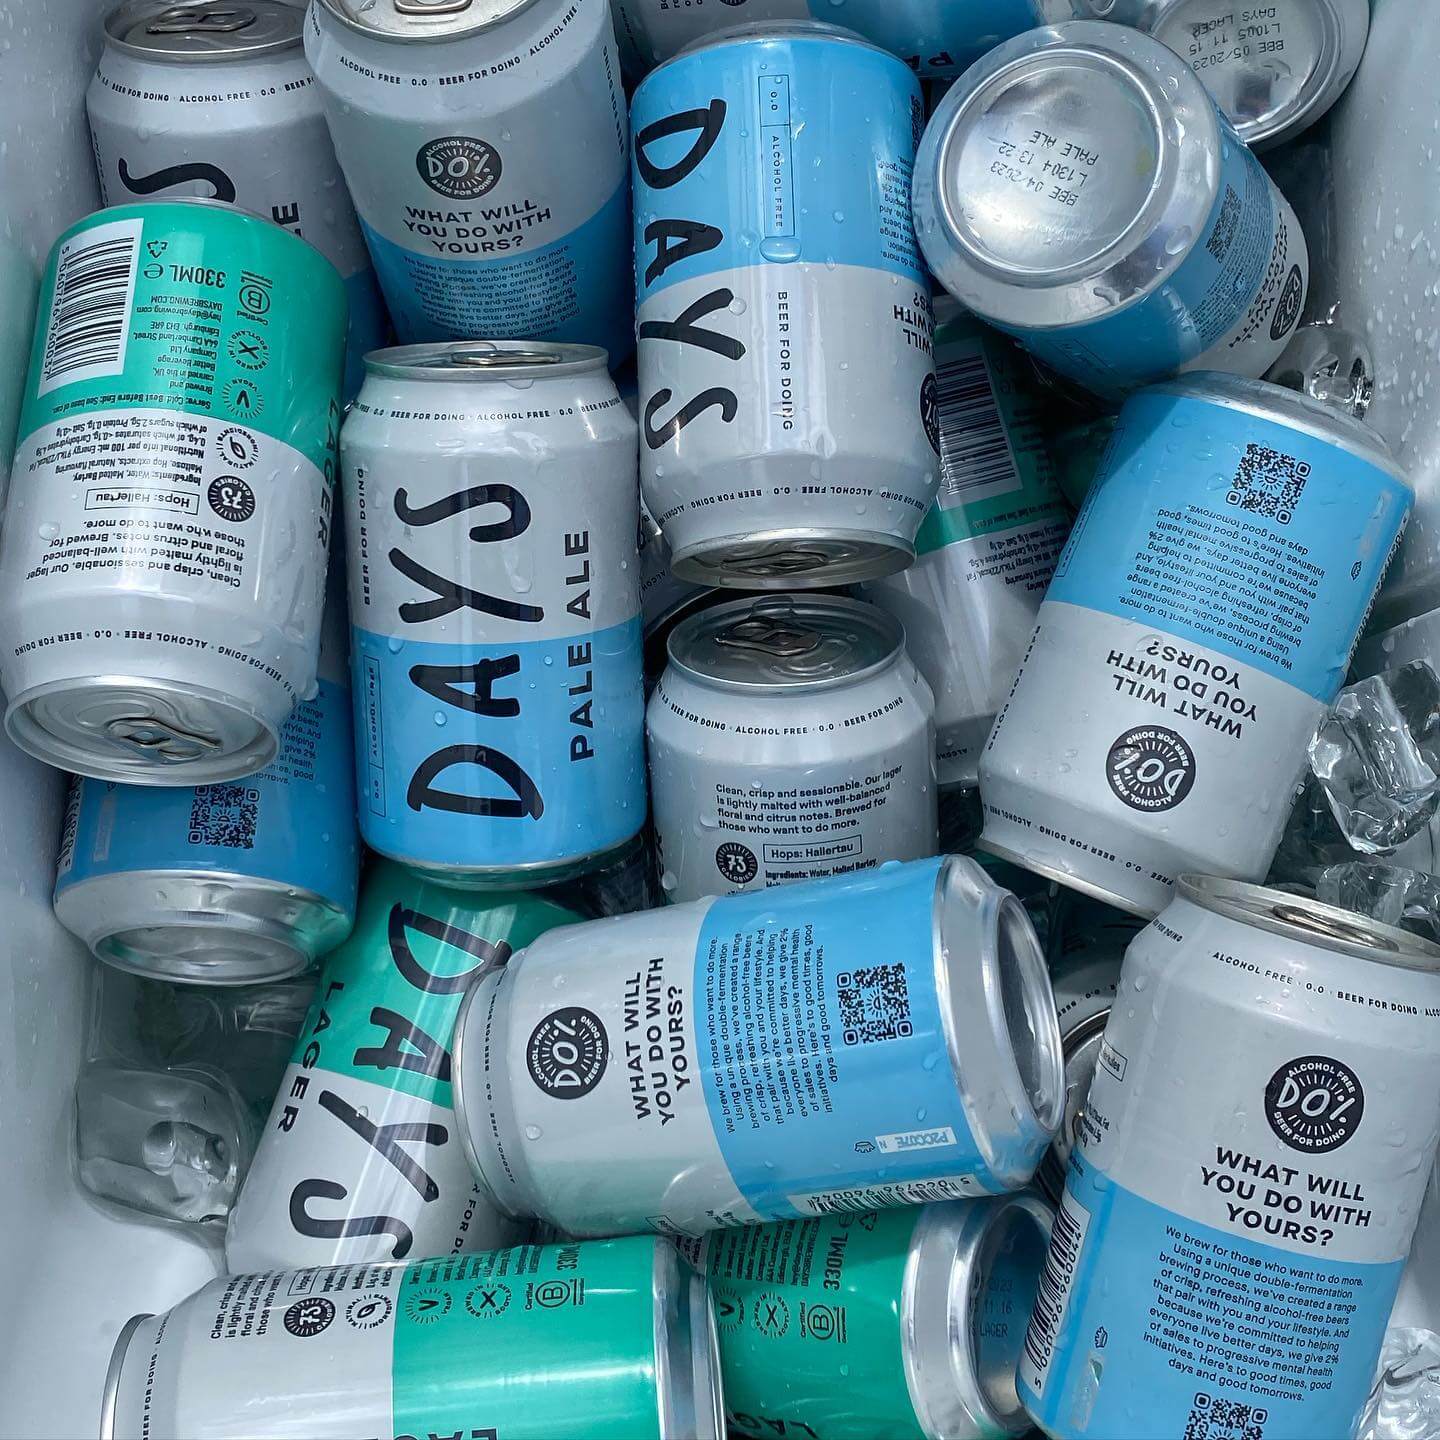 A glimpse of diverse products by Days Brewing Co, supporting the UK economy on YouK.